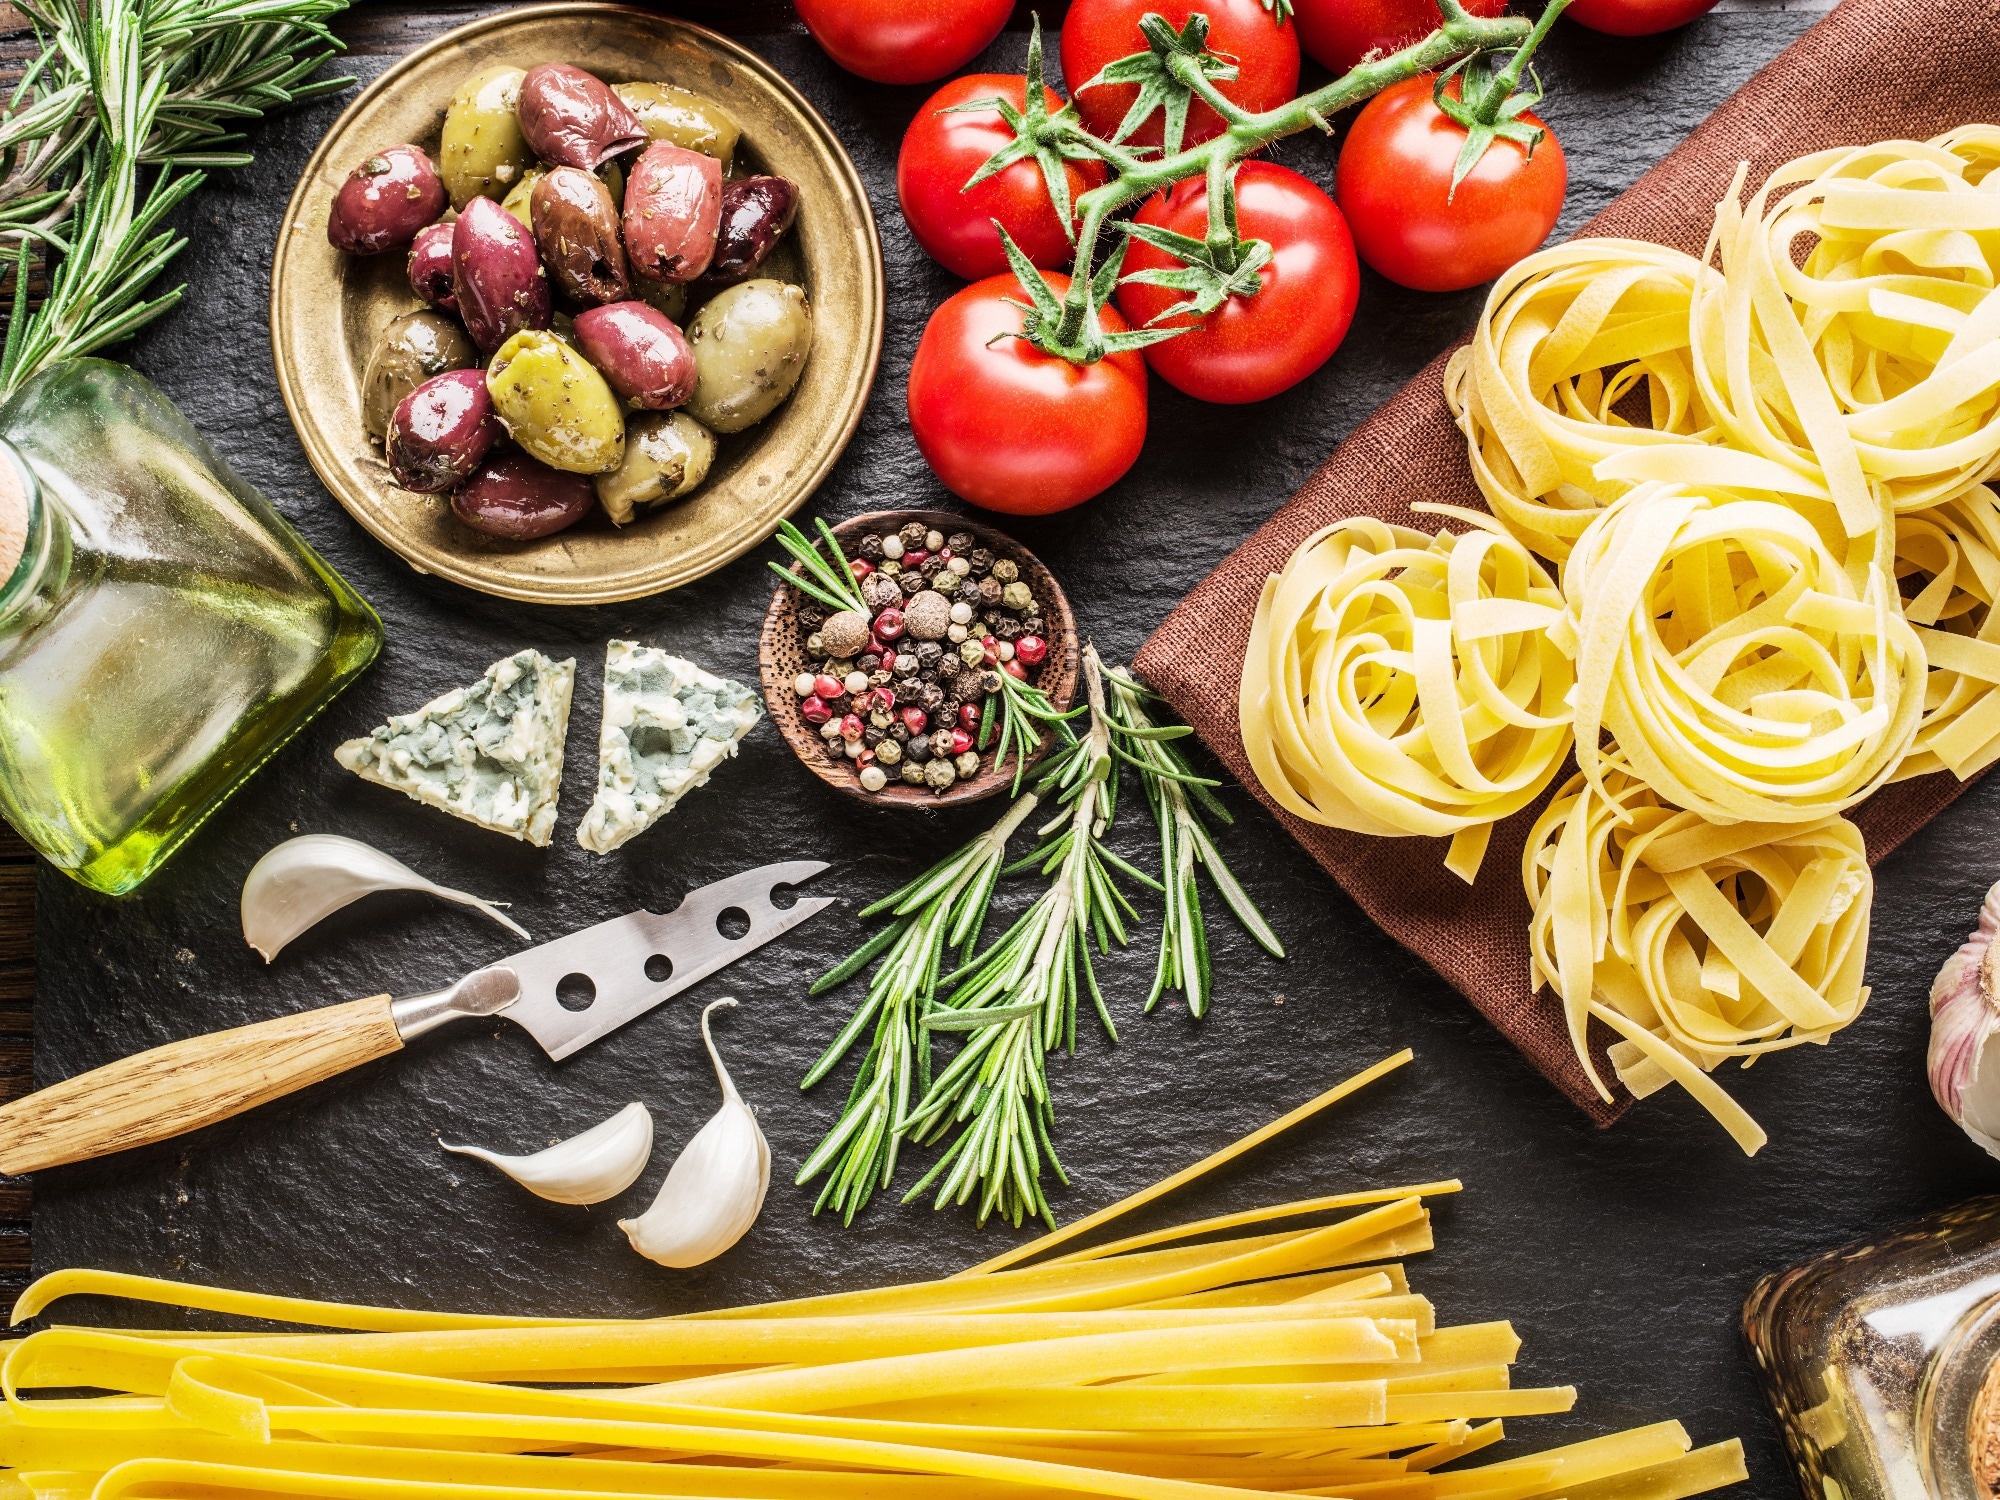 Study: Effect of 1-year lifestyle intervention with energy-reduced Mediterranean diet and physical activity promotion on the gut metabolome and microbiota: A randomized clinical trial. Image Credit: Valentyn Volkov / Shutterstock.com